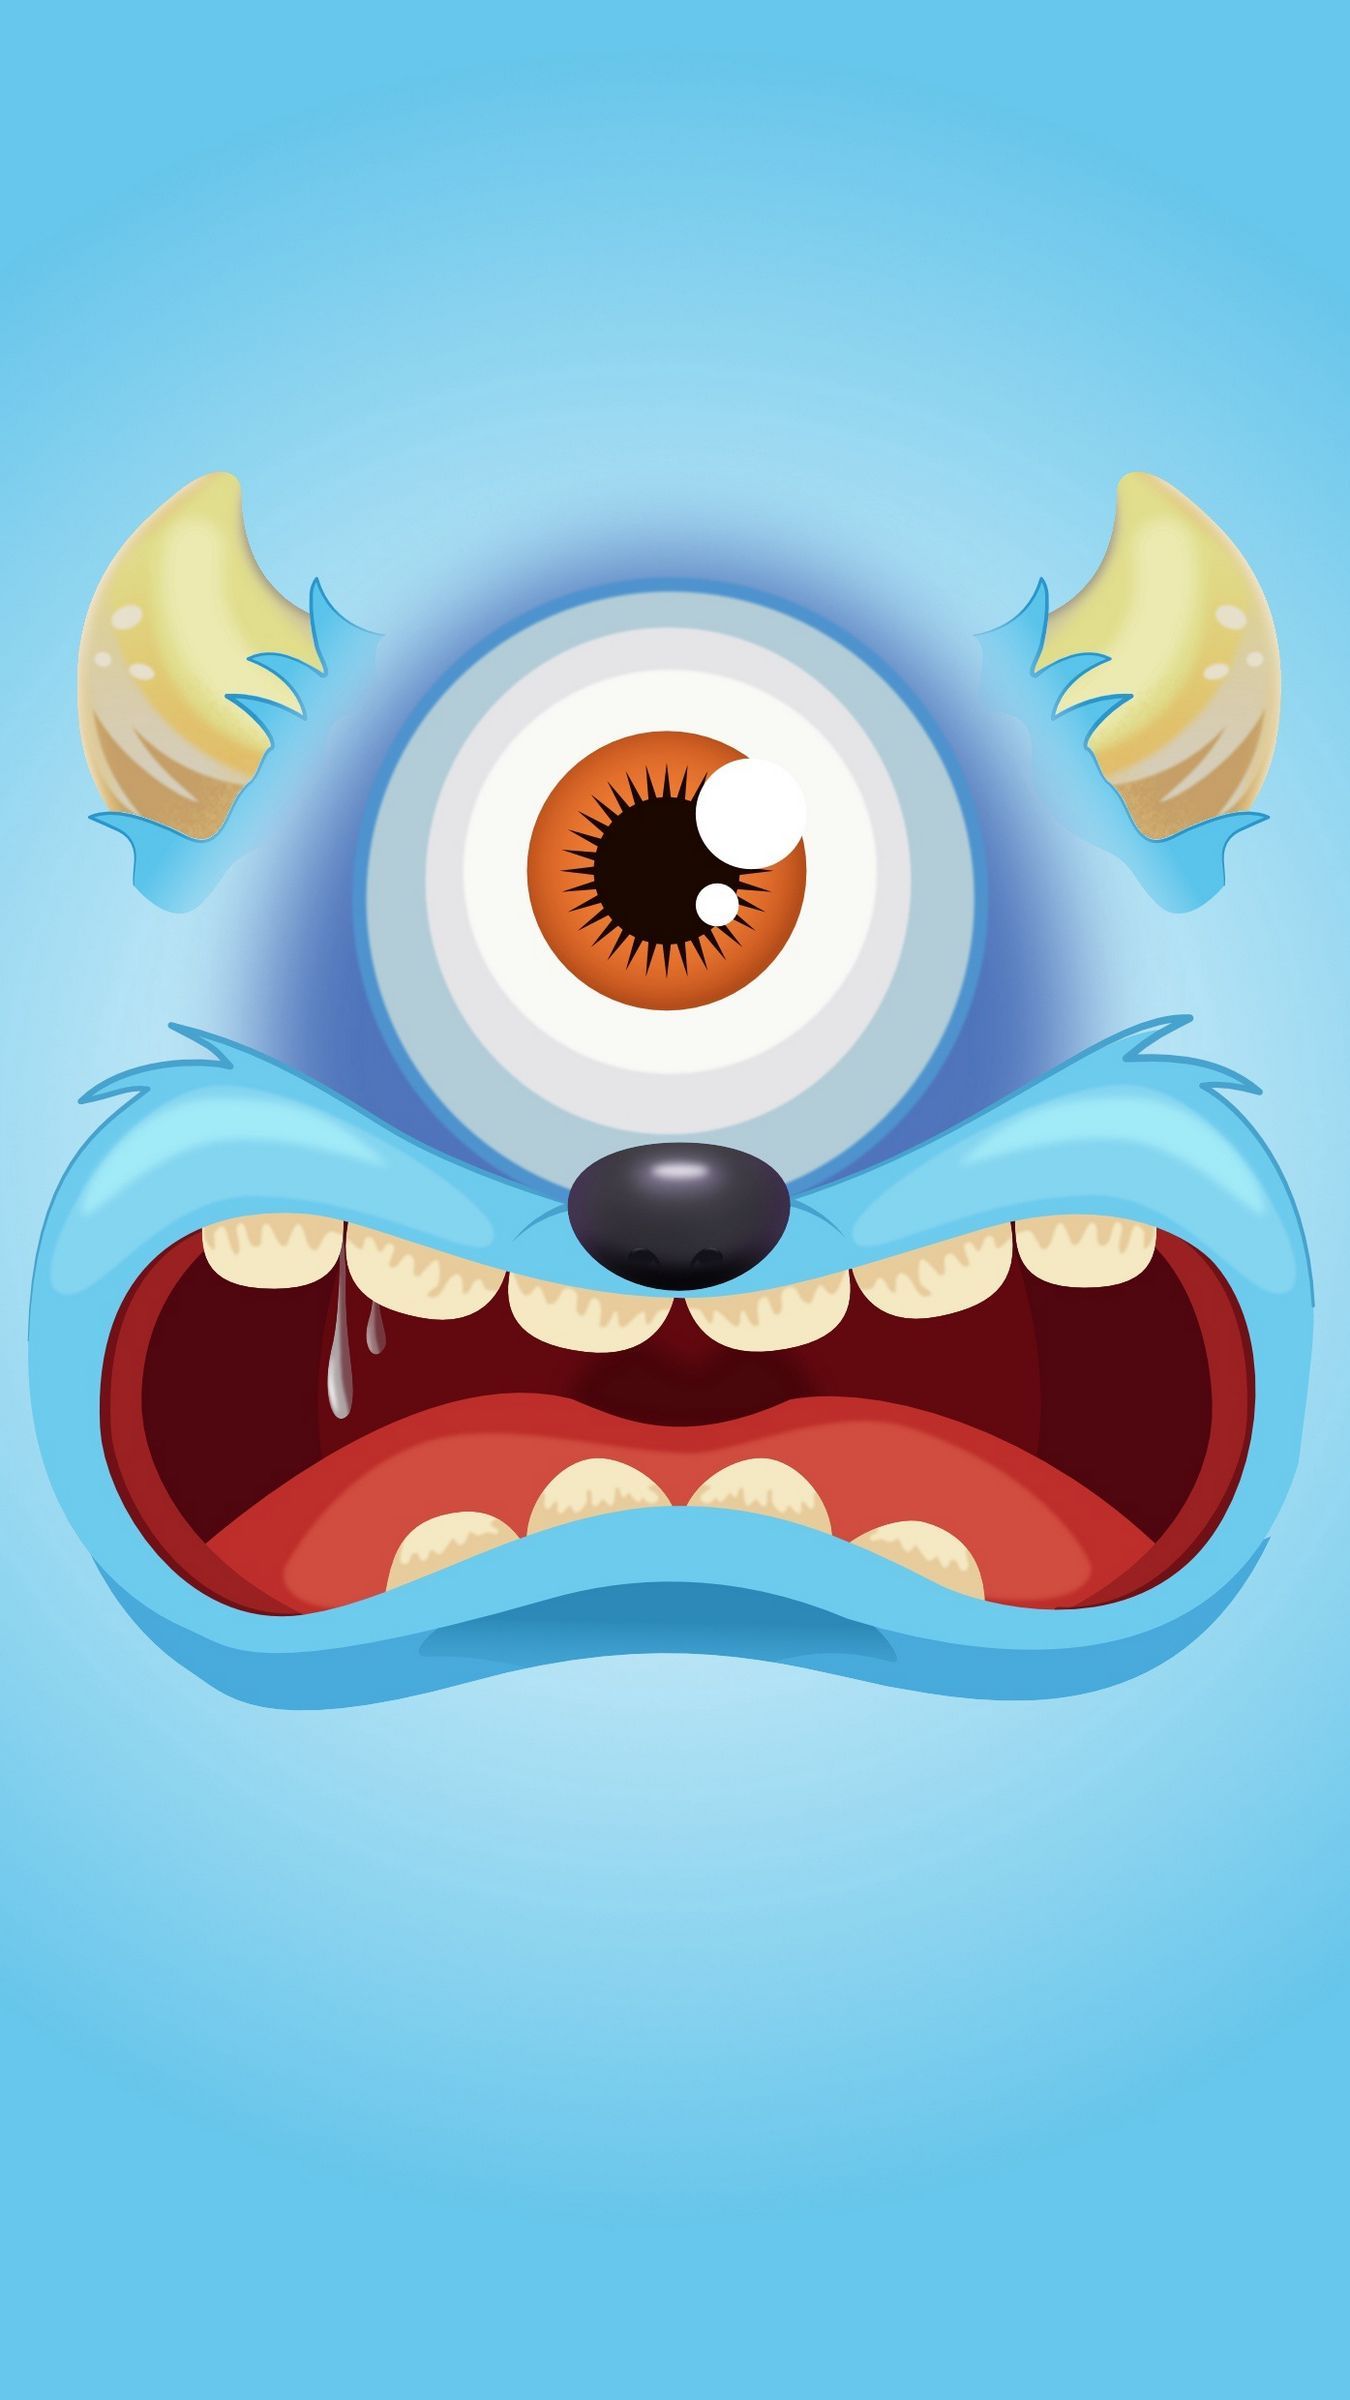 Download wallpaper 1350x2400 monster, cute, art, vector iphone 8+/7+/6s+/for parallax HD background